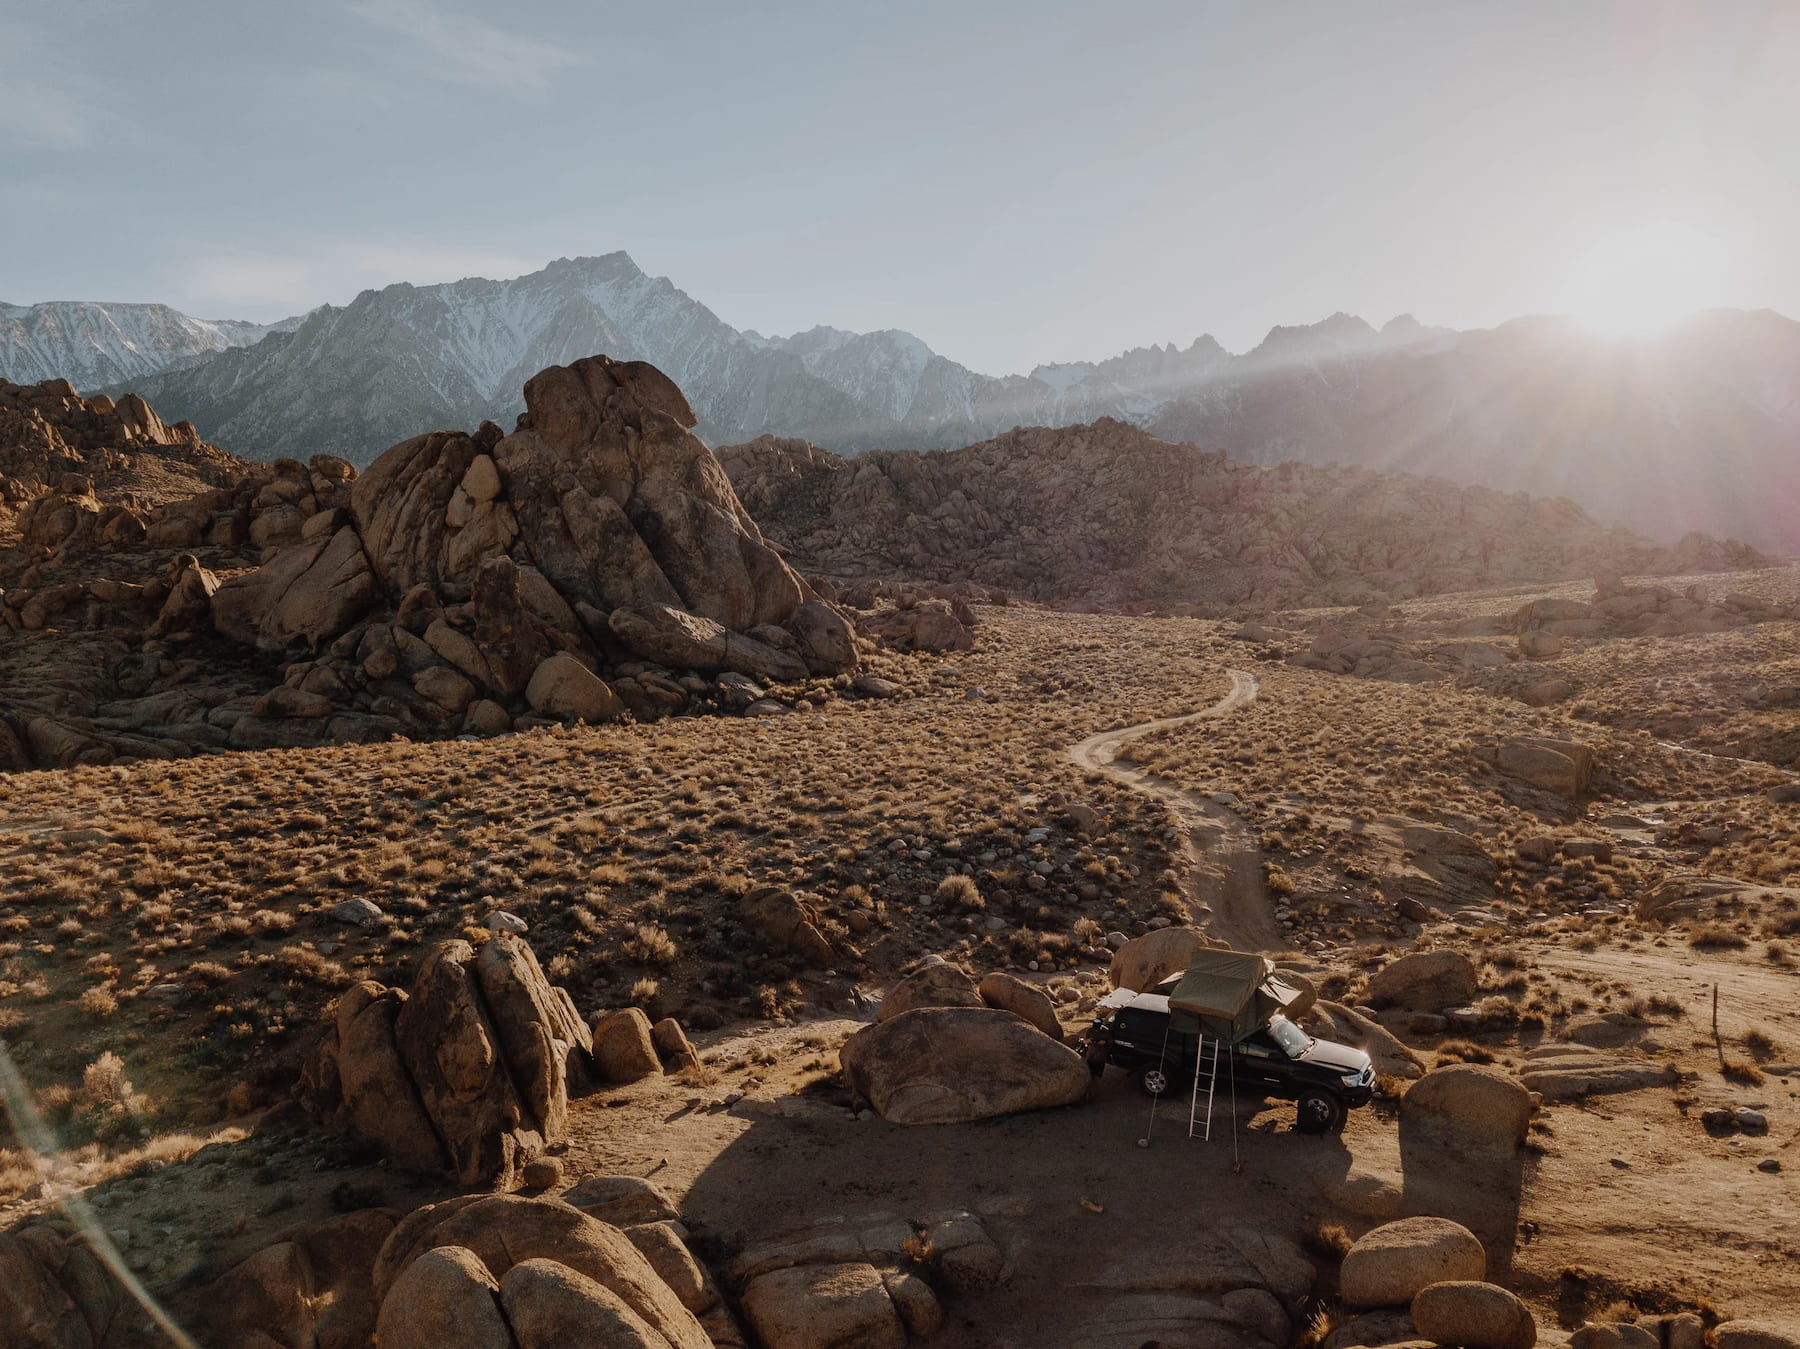 Sun shining over the jagged snowcapped sierras with a truck camper parked in the desert below at Alabama Hills.